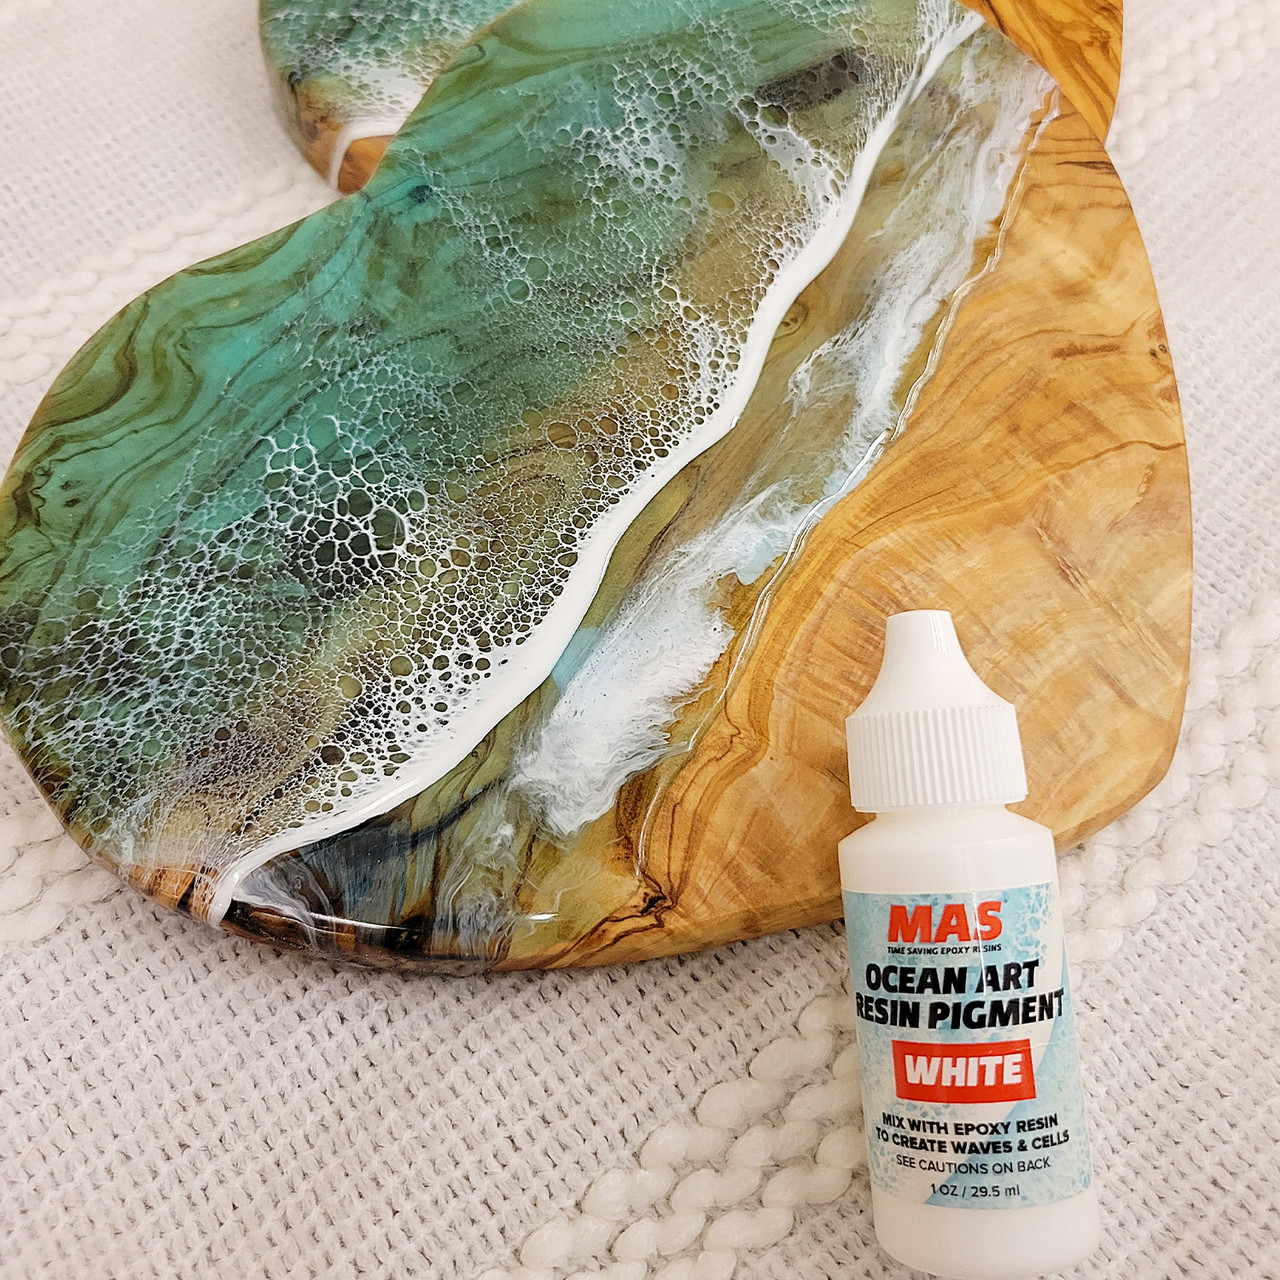 How to color epoxy resin using pigments and dyes